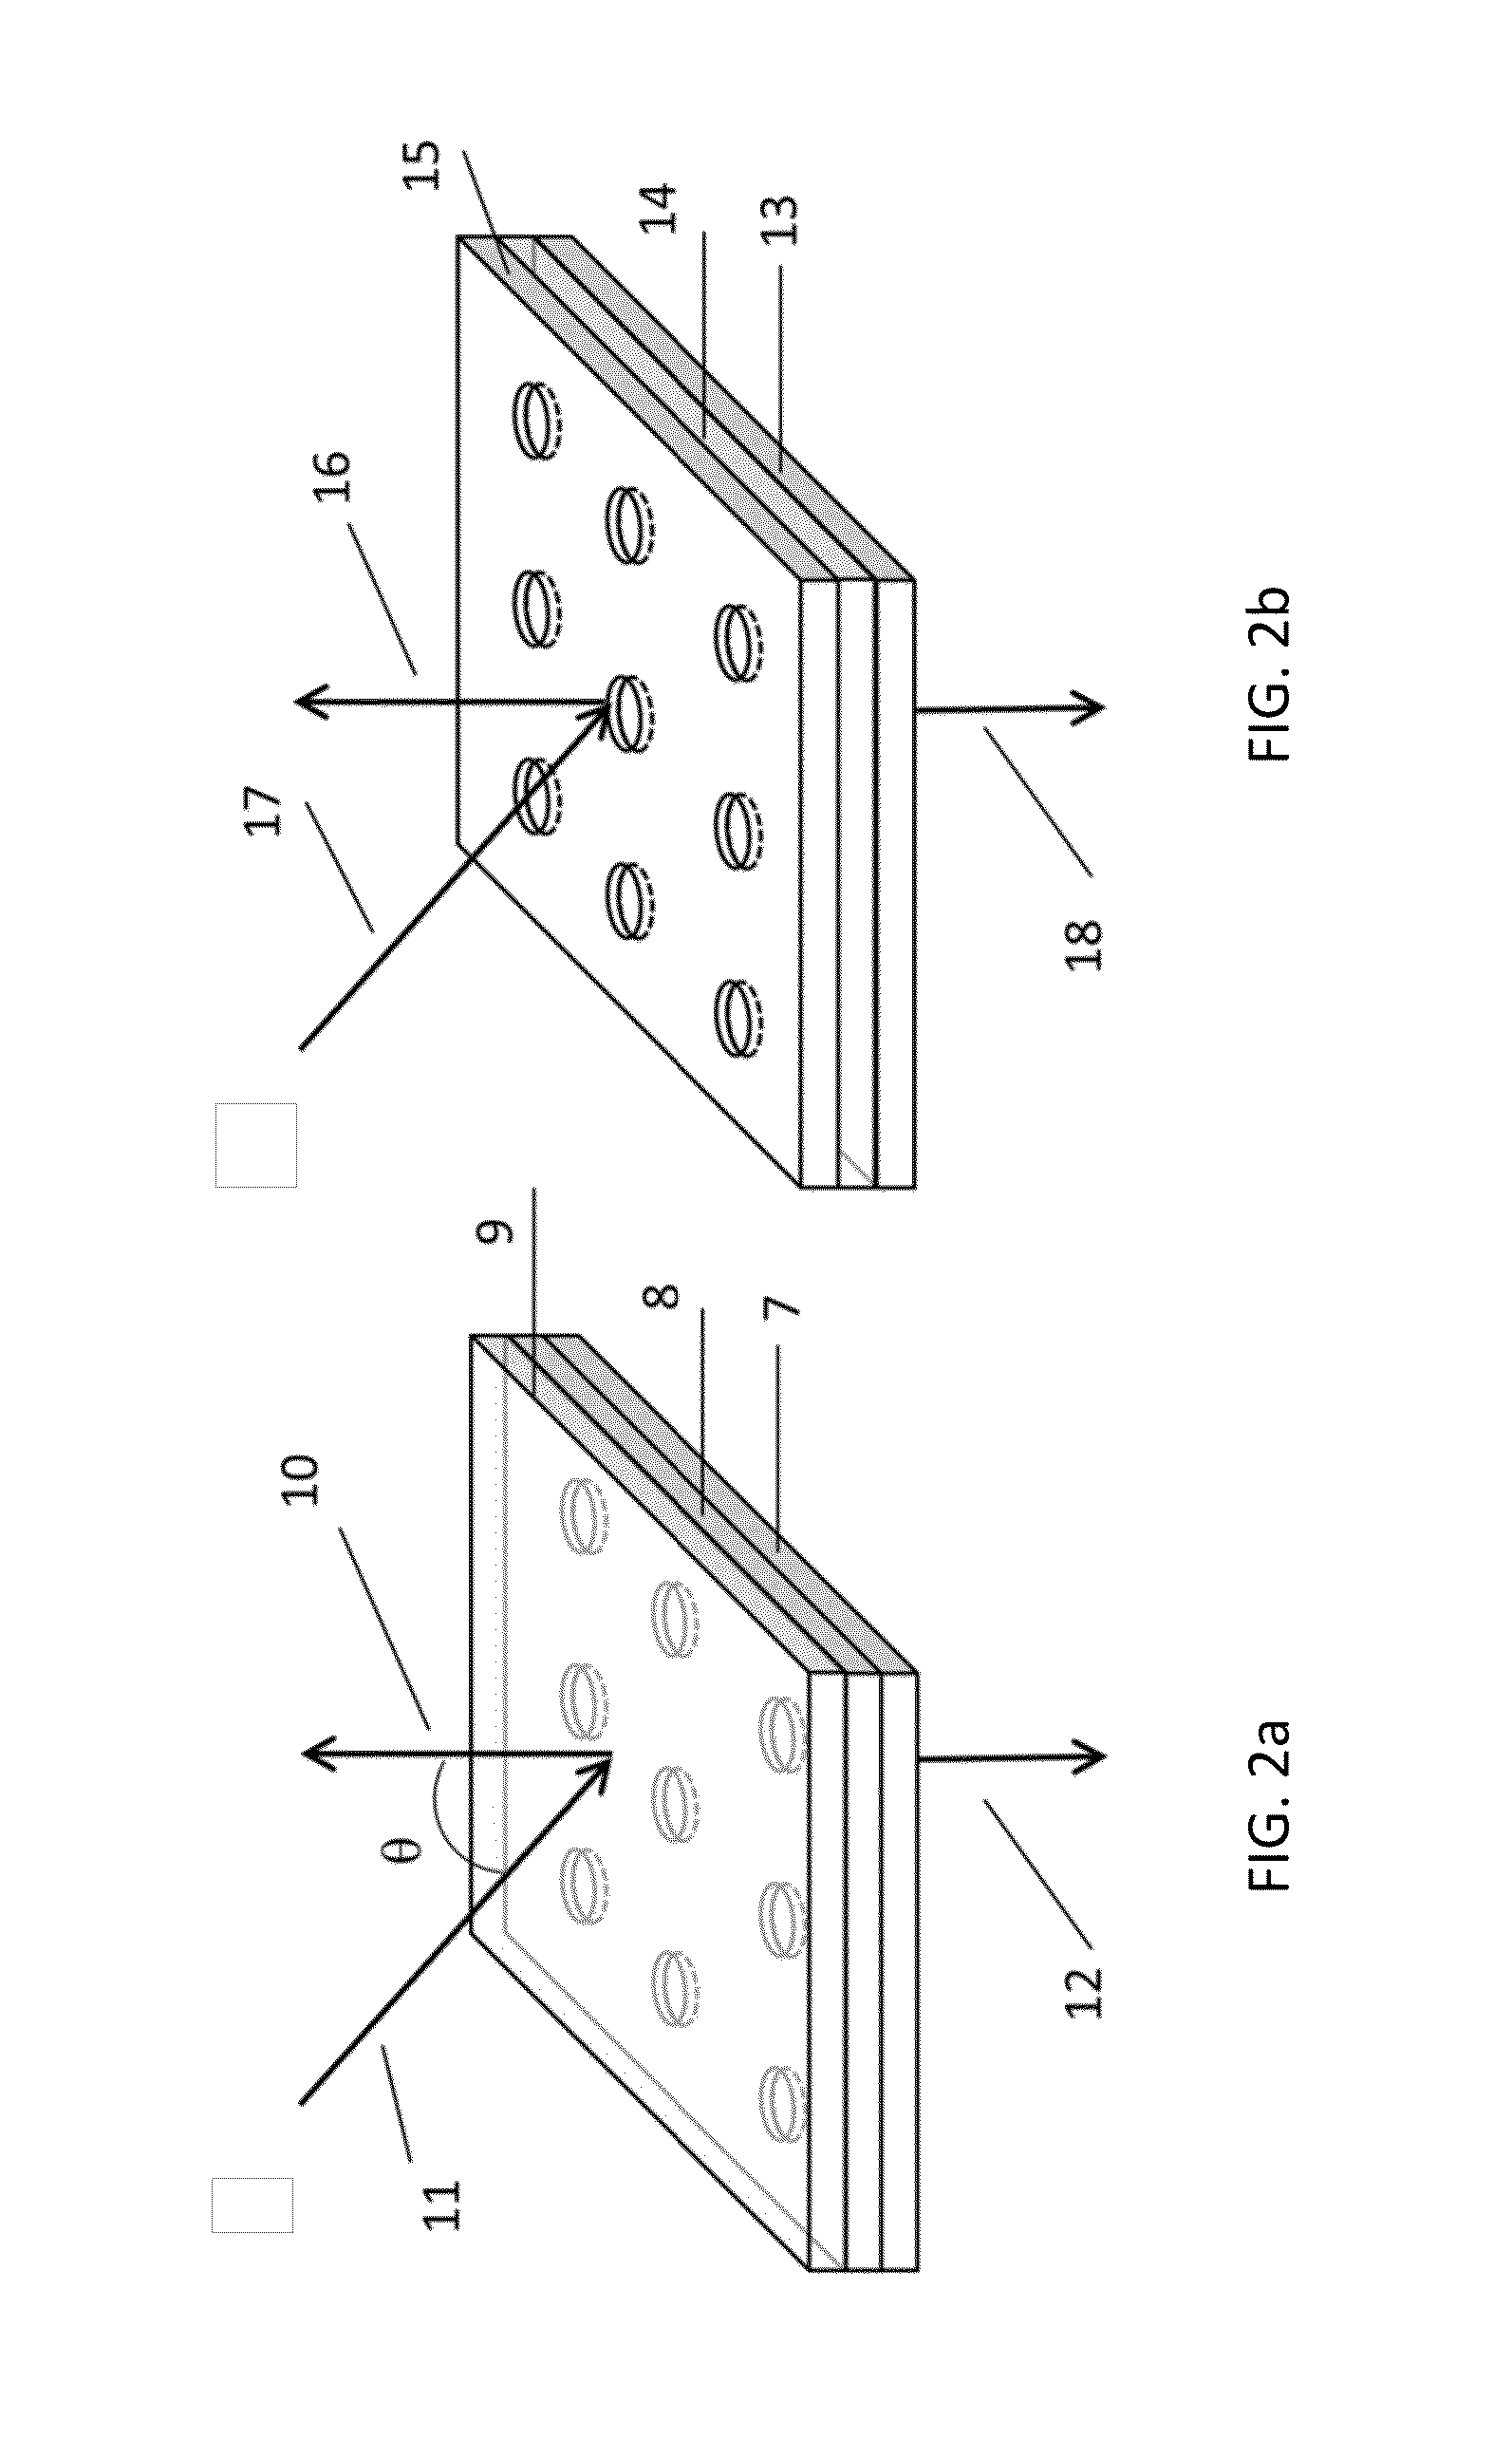 Laser with sub-wavelength hole array in metal film